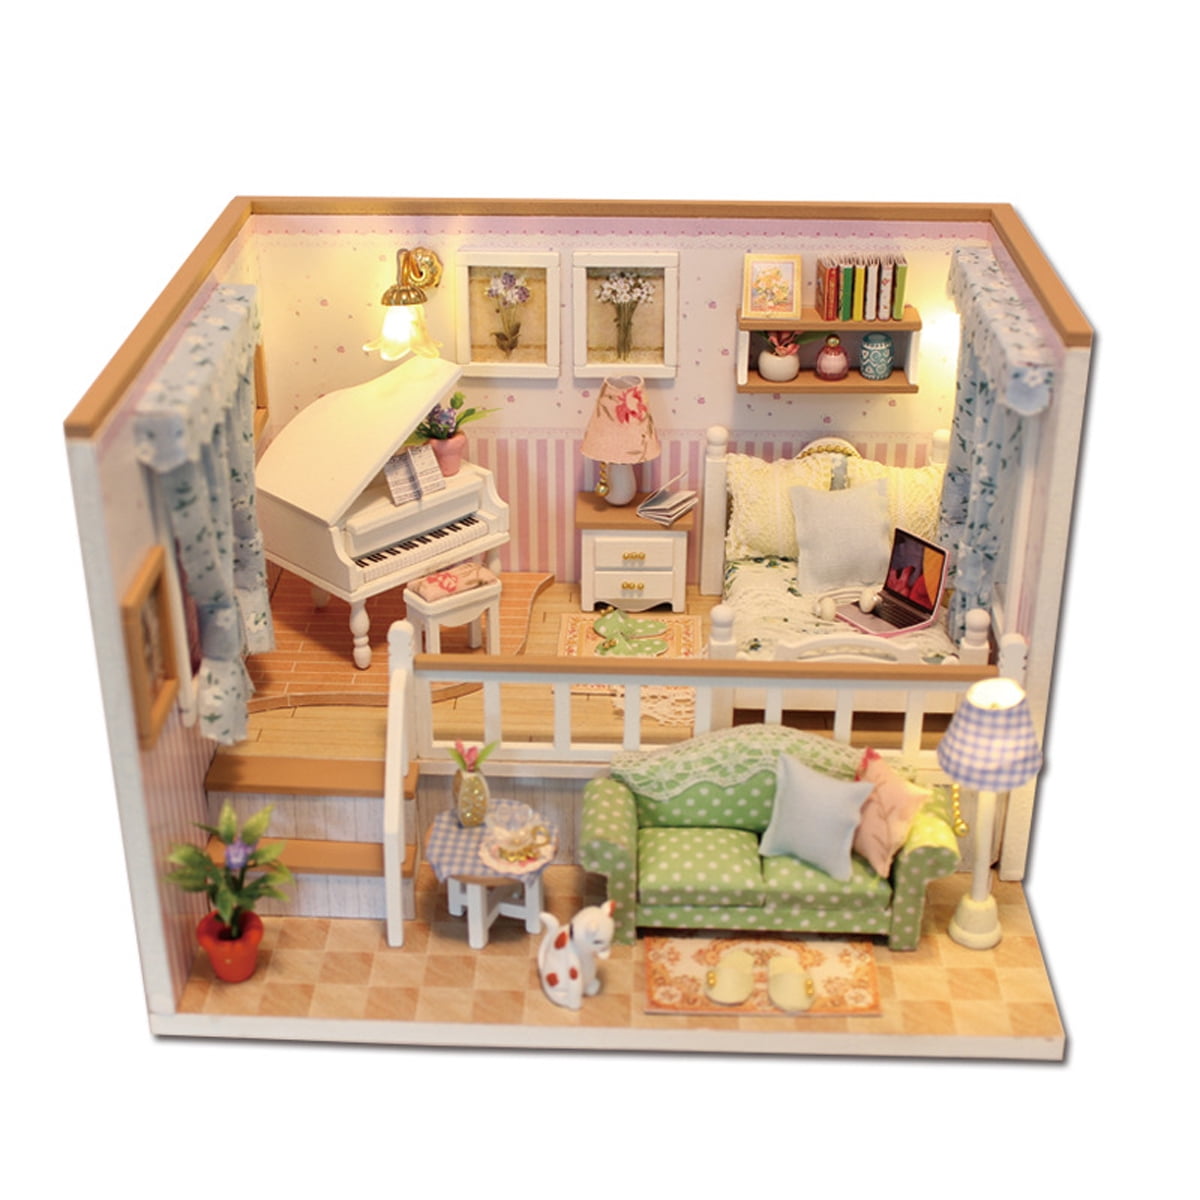 ABS Miniature Bunk Bed Model for 1/12 Dolls House Children Bedroom Furniture Life Scenes Decor Room Accessory #1